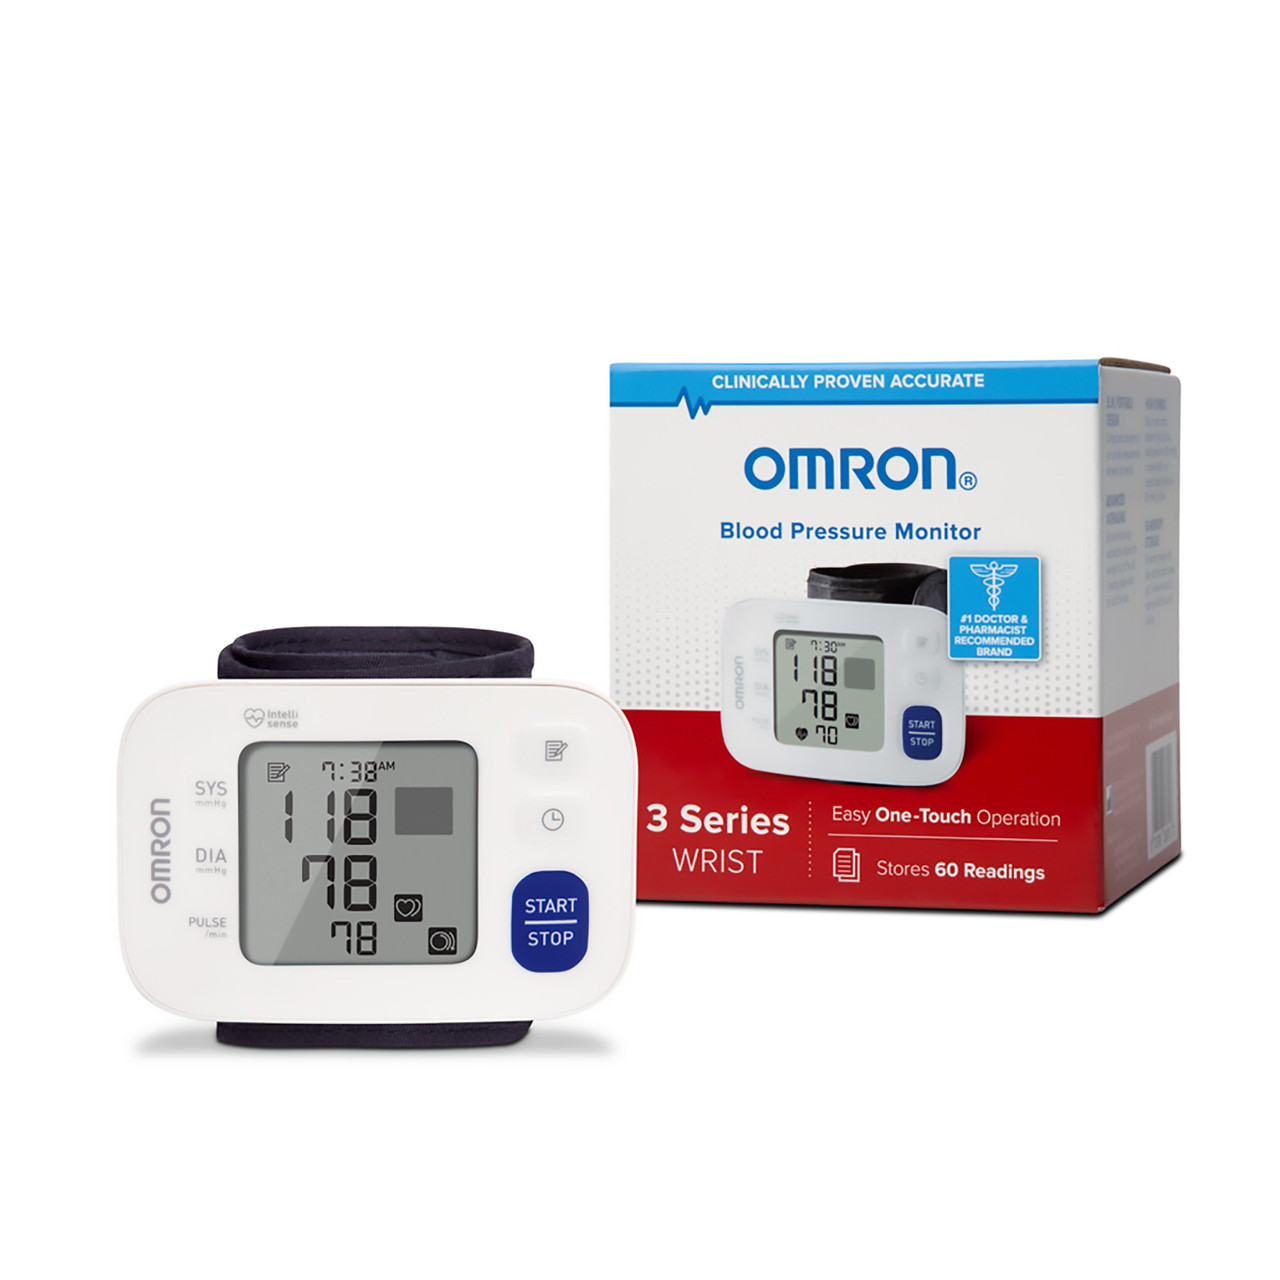 Blood Pressure Monitoring at Home with the Omron 5 Series Monitor